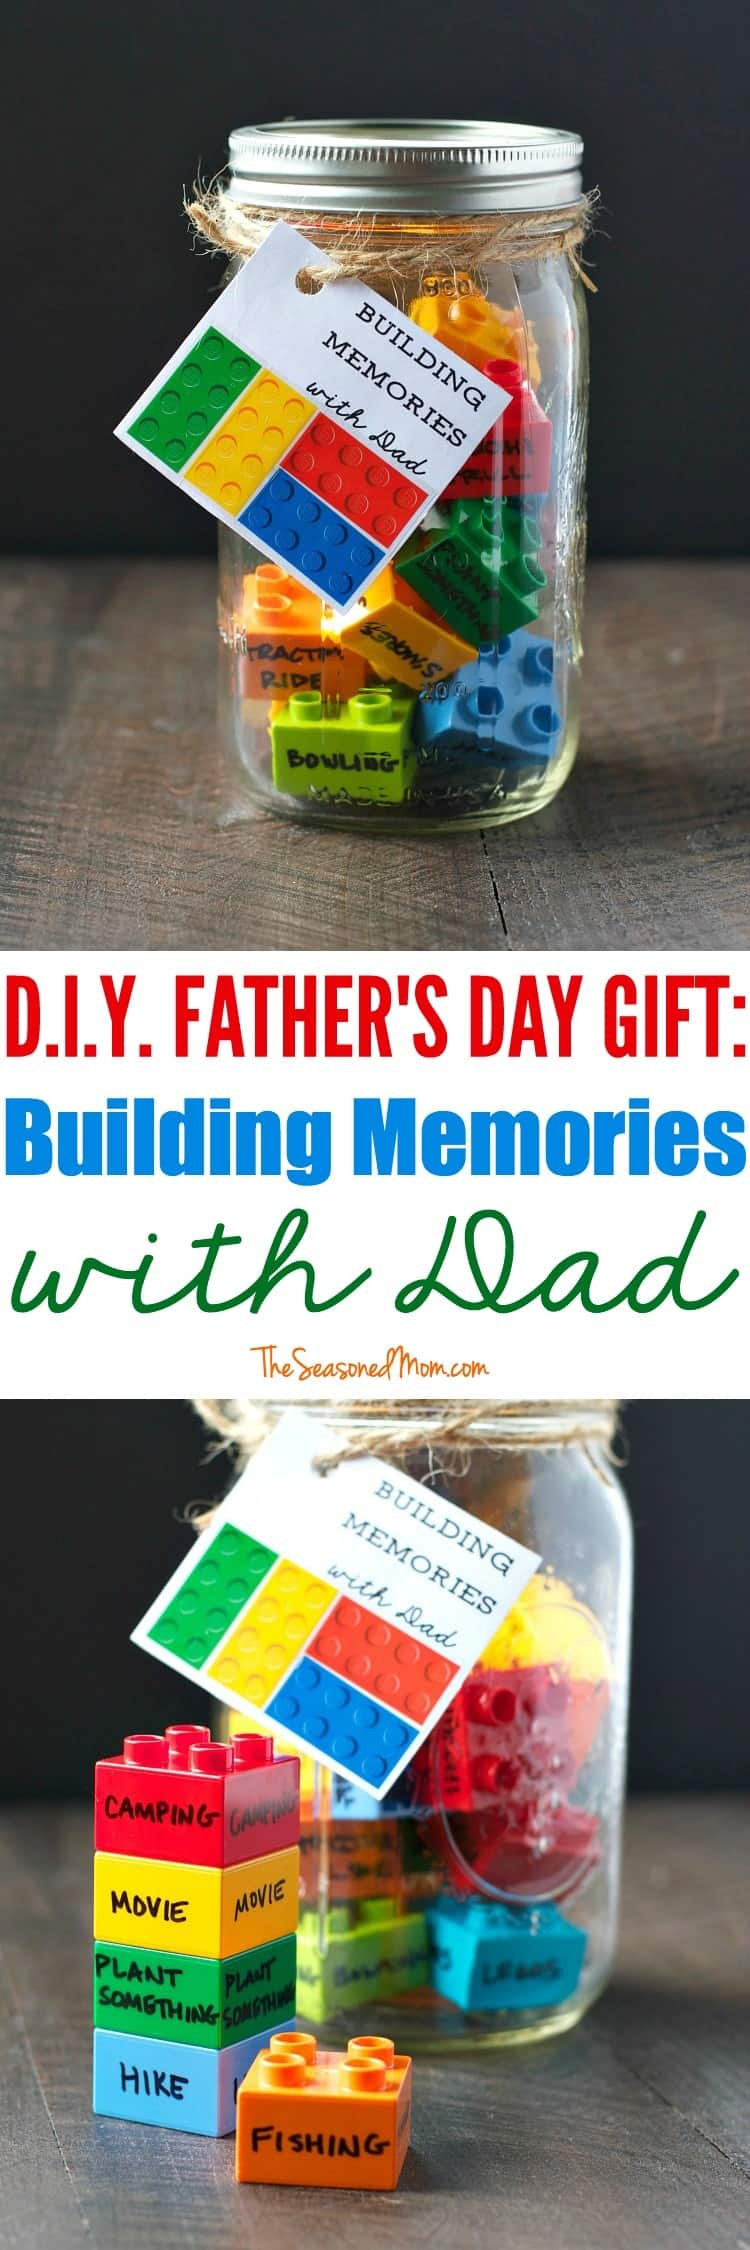 DIY Daddy Gifts
 DIY Father s Day Gift Building Memories with Dad The